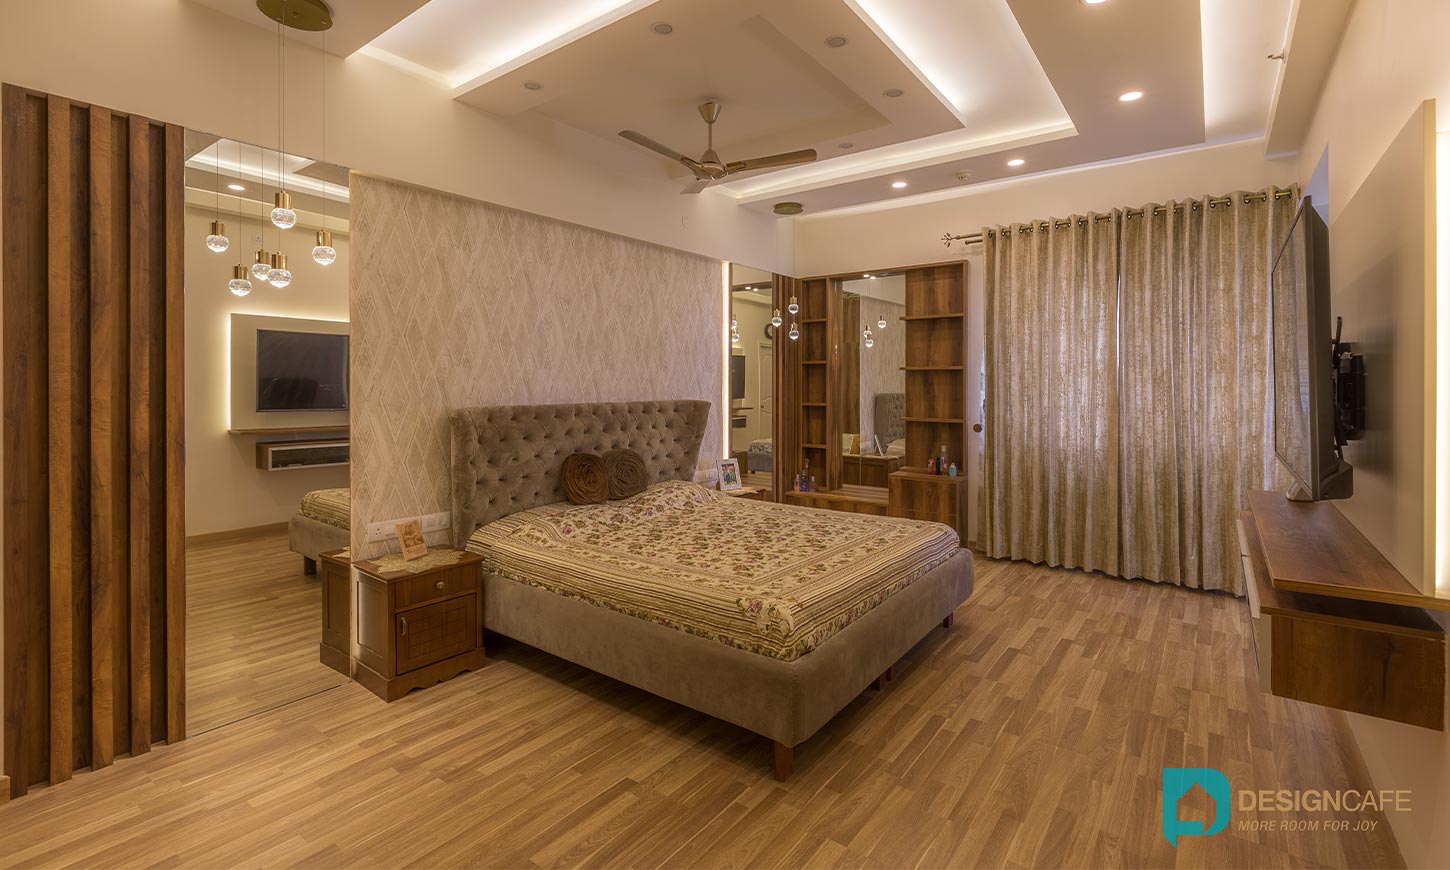 Modern bedroom designed by design cafe for house interiors in bangalore